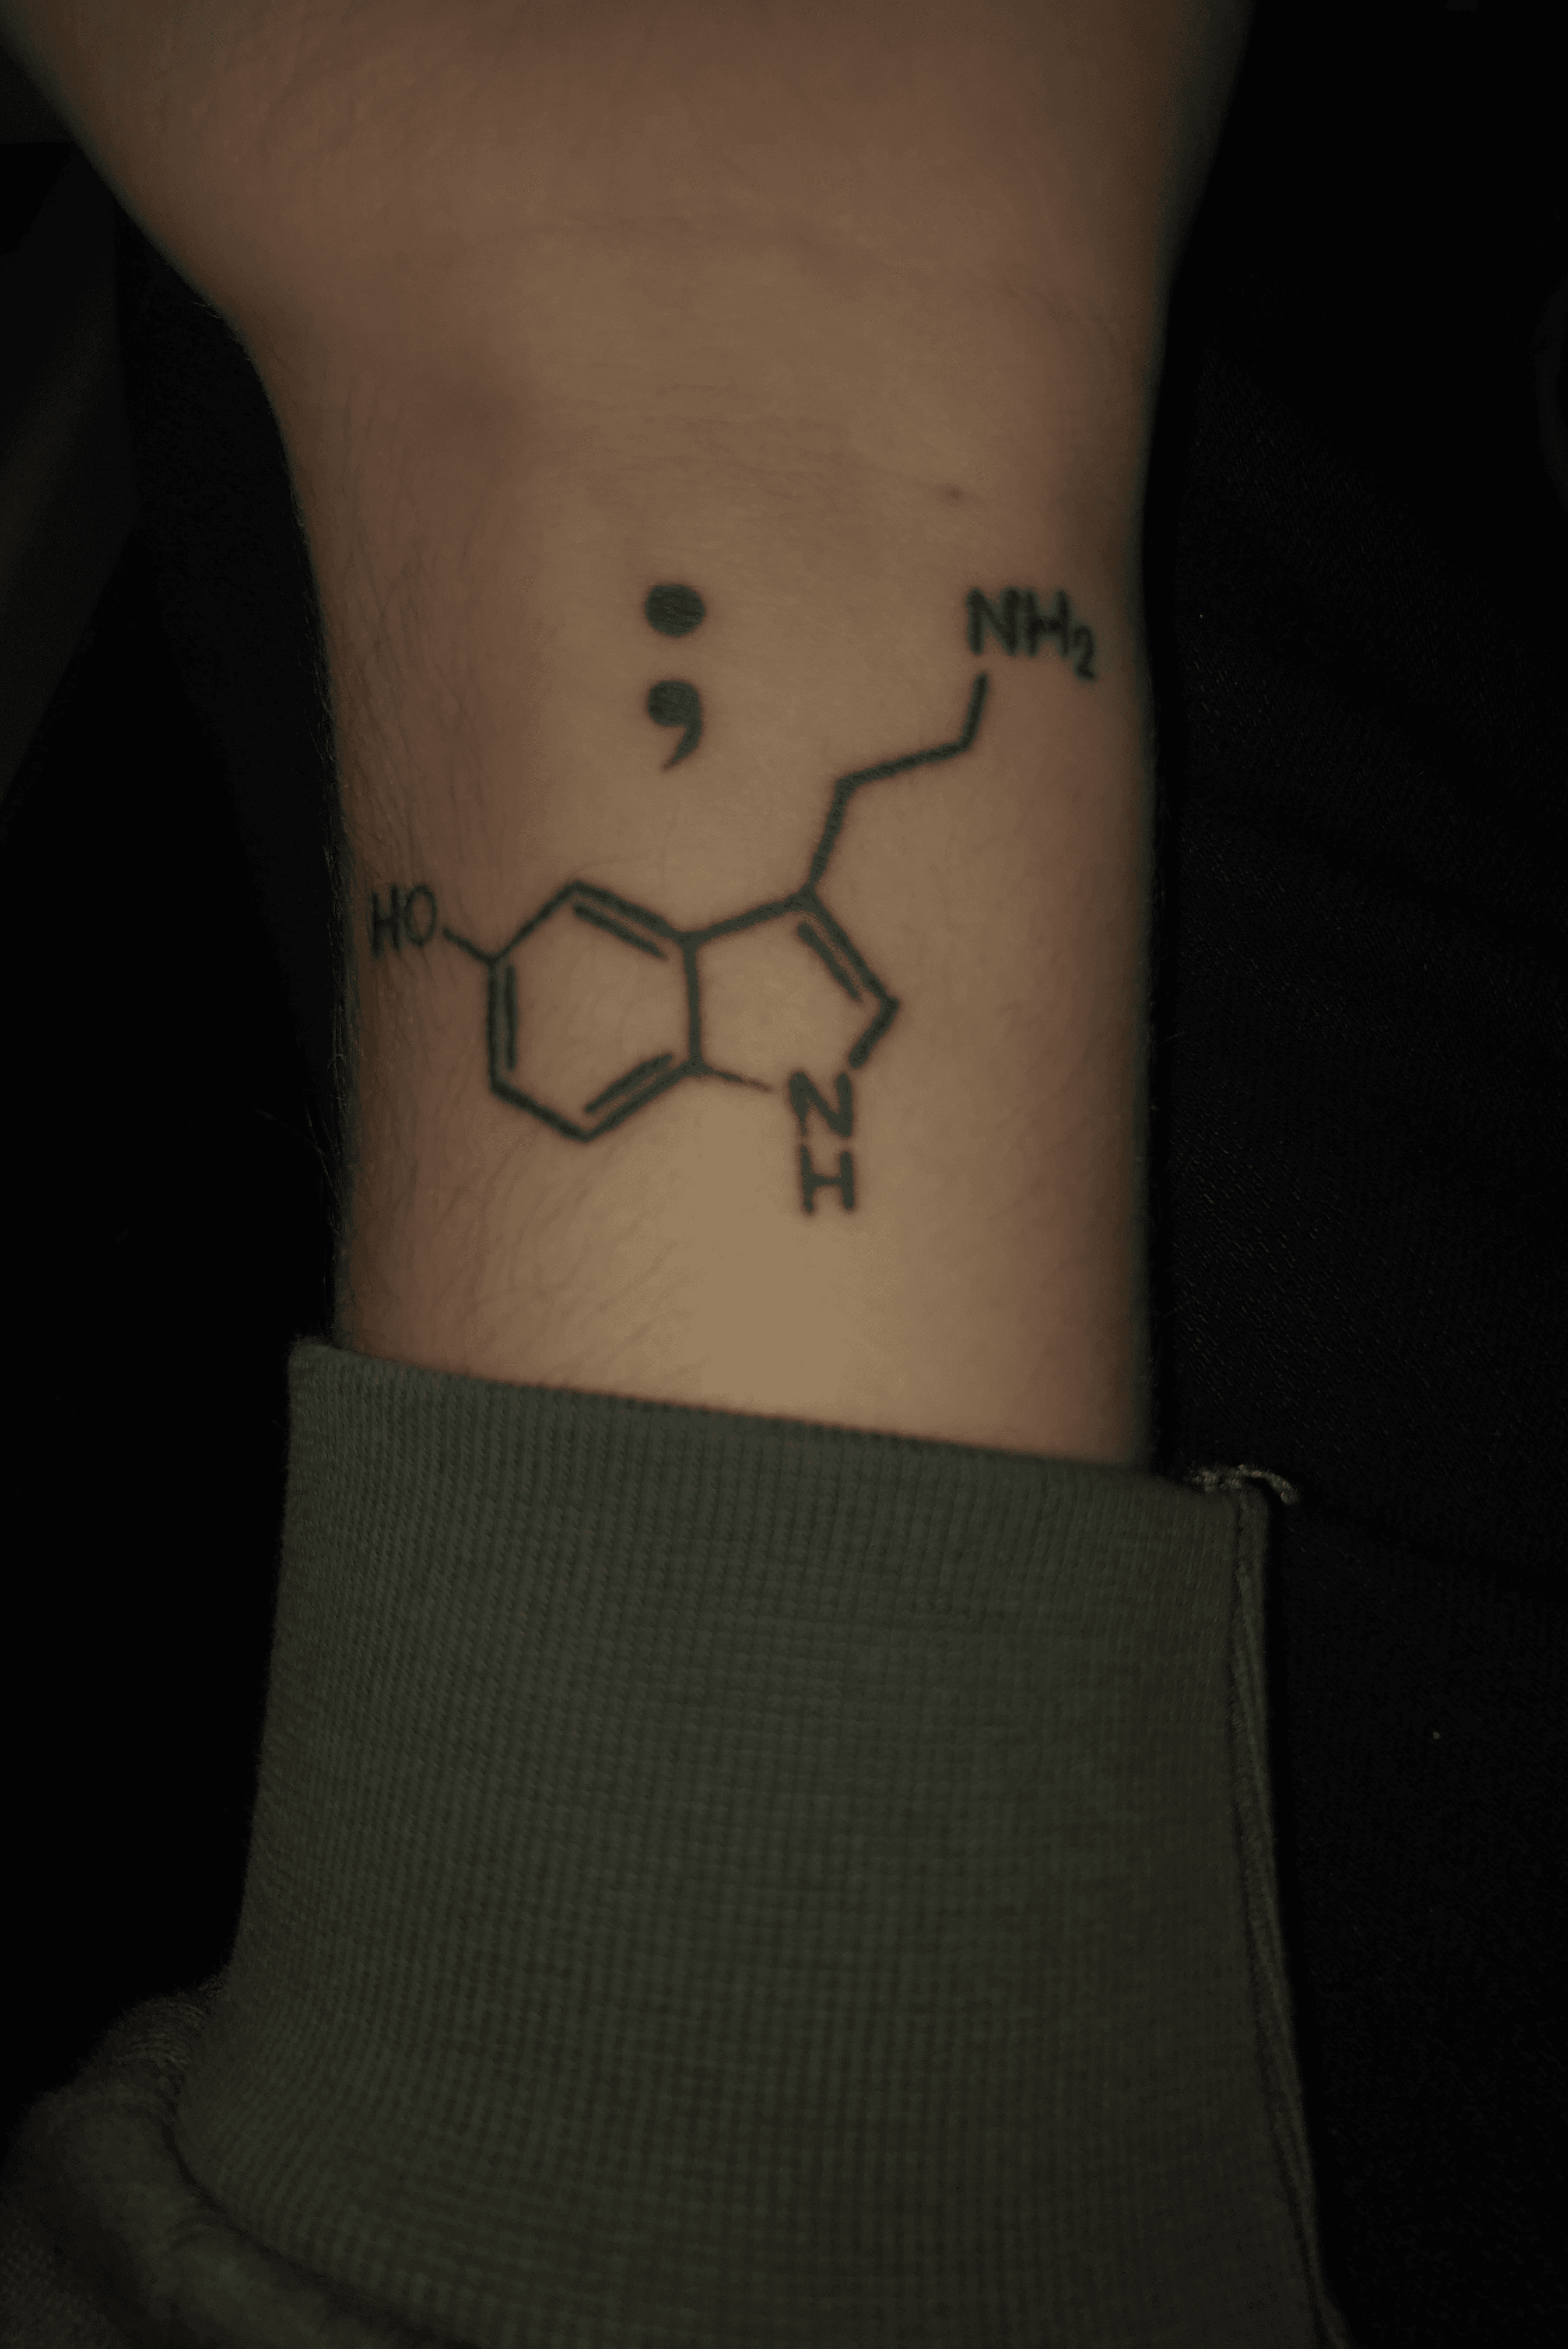 Just got this as my first tattoo after some inspiration from right here  Really happy with how it turned out and wanted to share with you guys  r chemistry